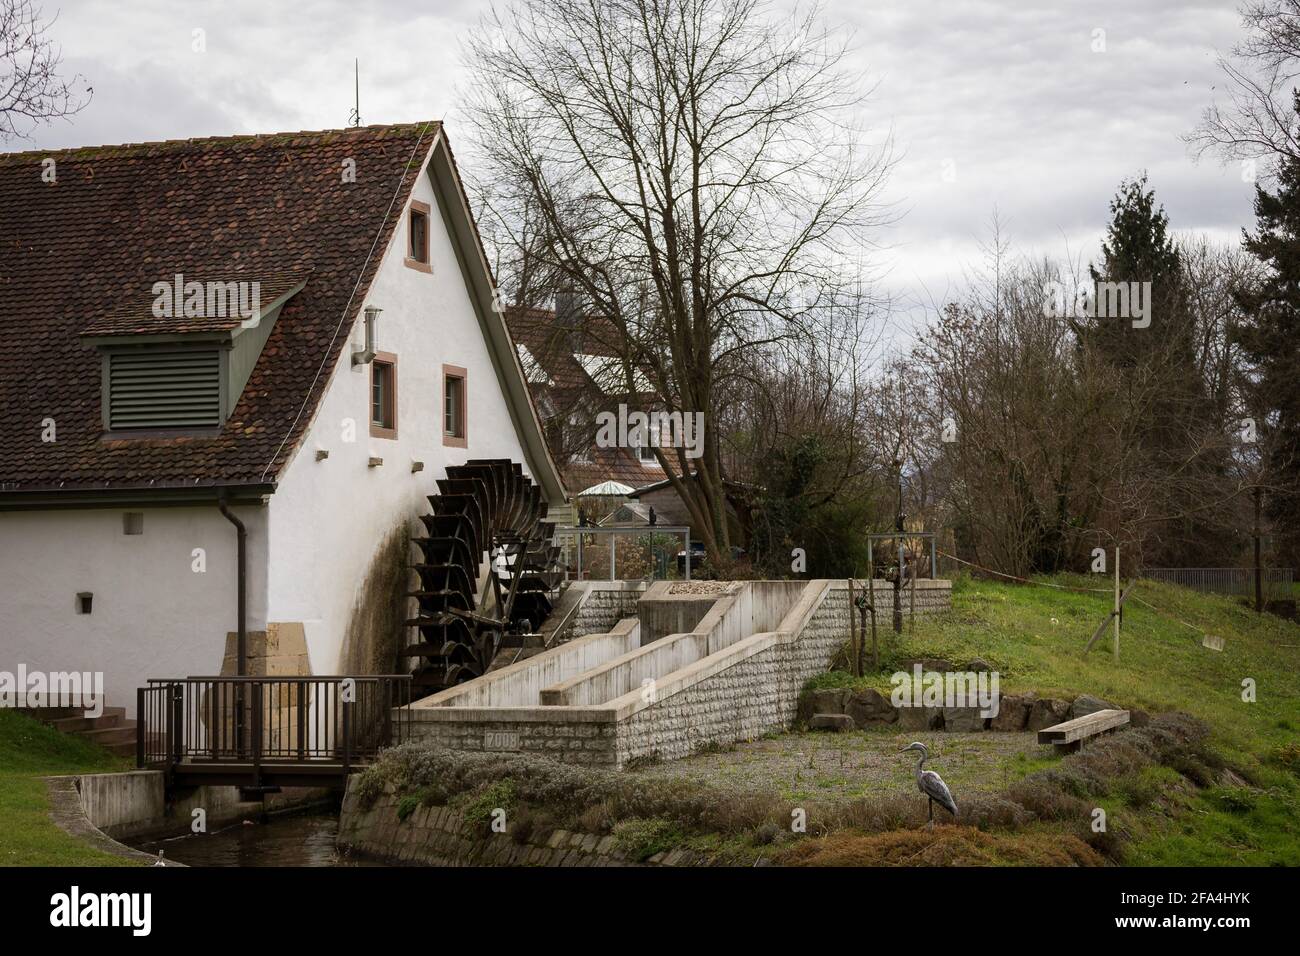 Umkirch, Germany - December 24, 2014: A morning view of a house with a watermill in the city of Umkirch, Germany. Stock Photo